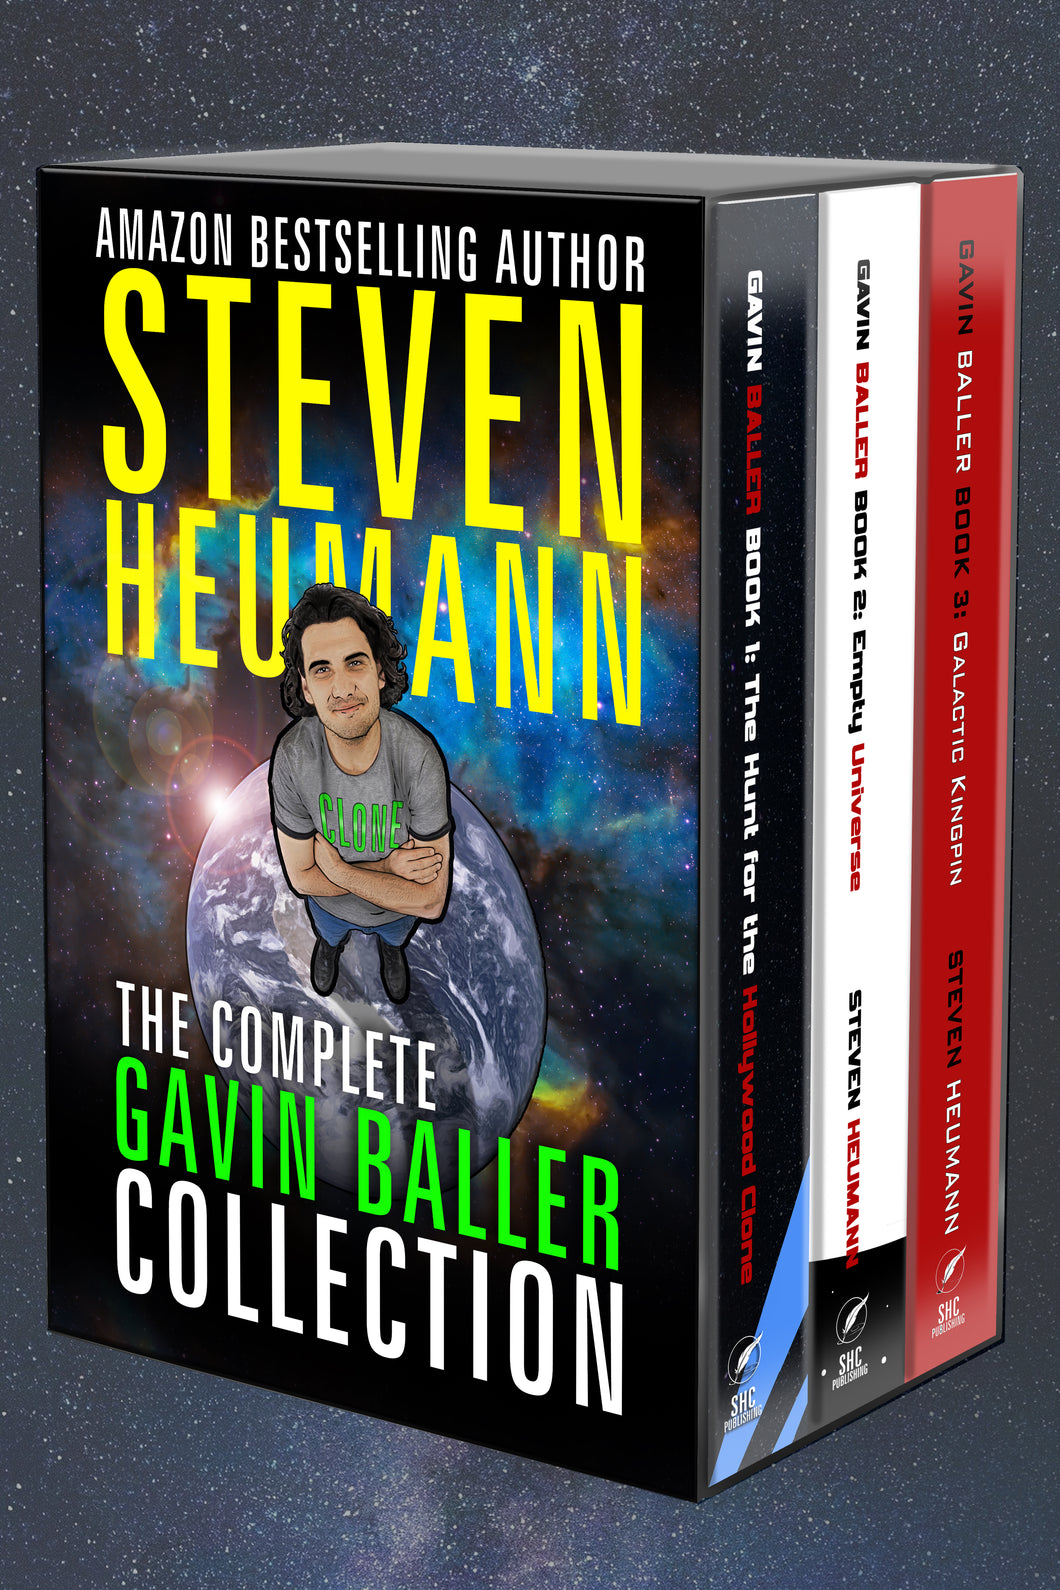 The COMPLETE Gavin Baller Collection (Kindle and ePub)